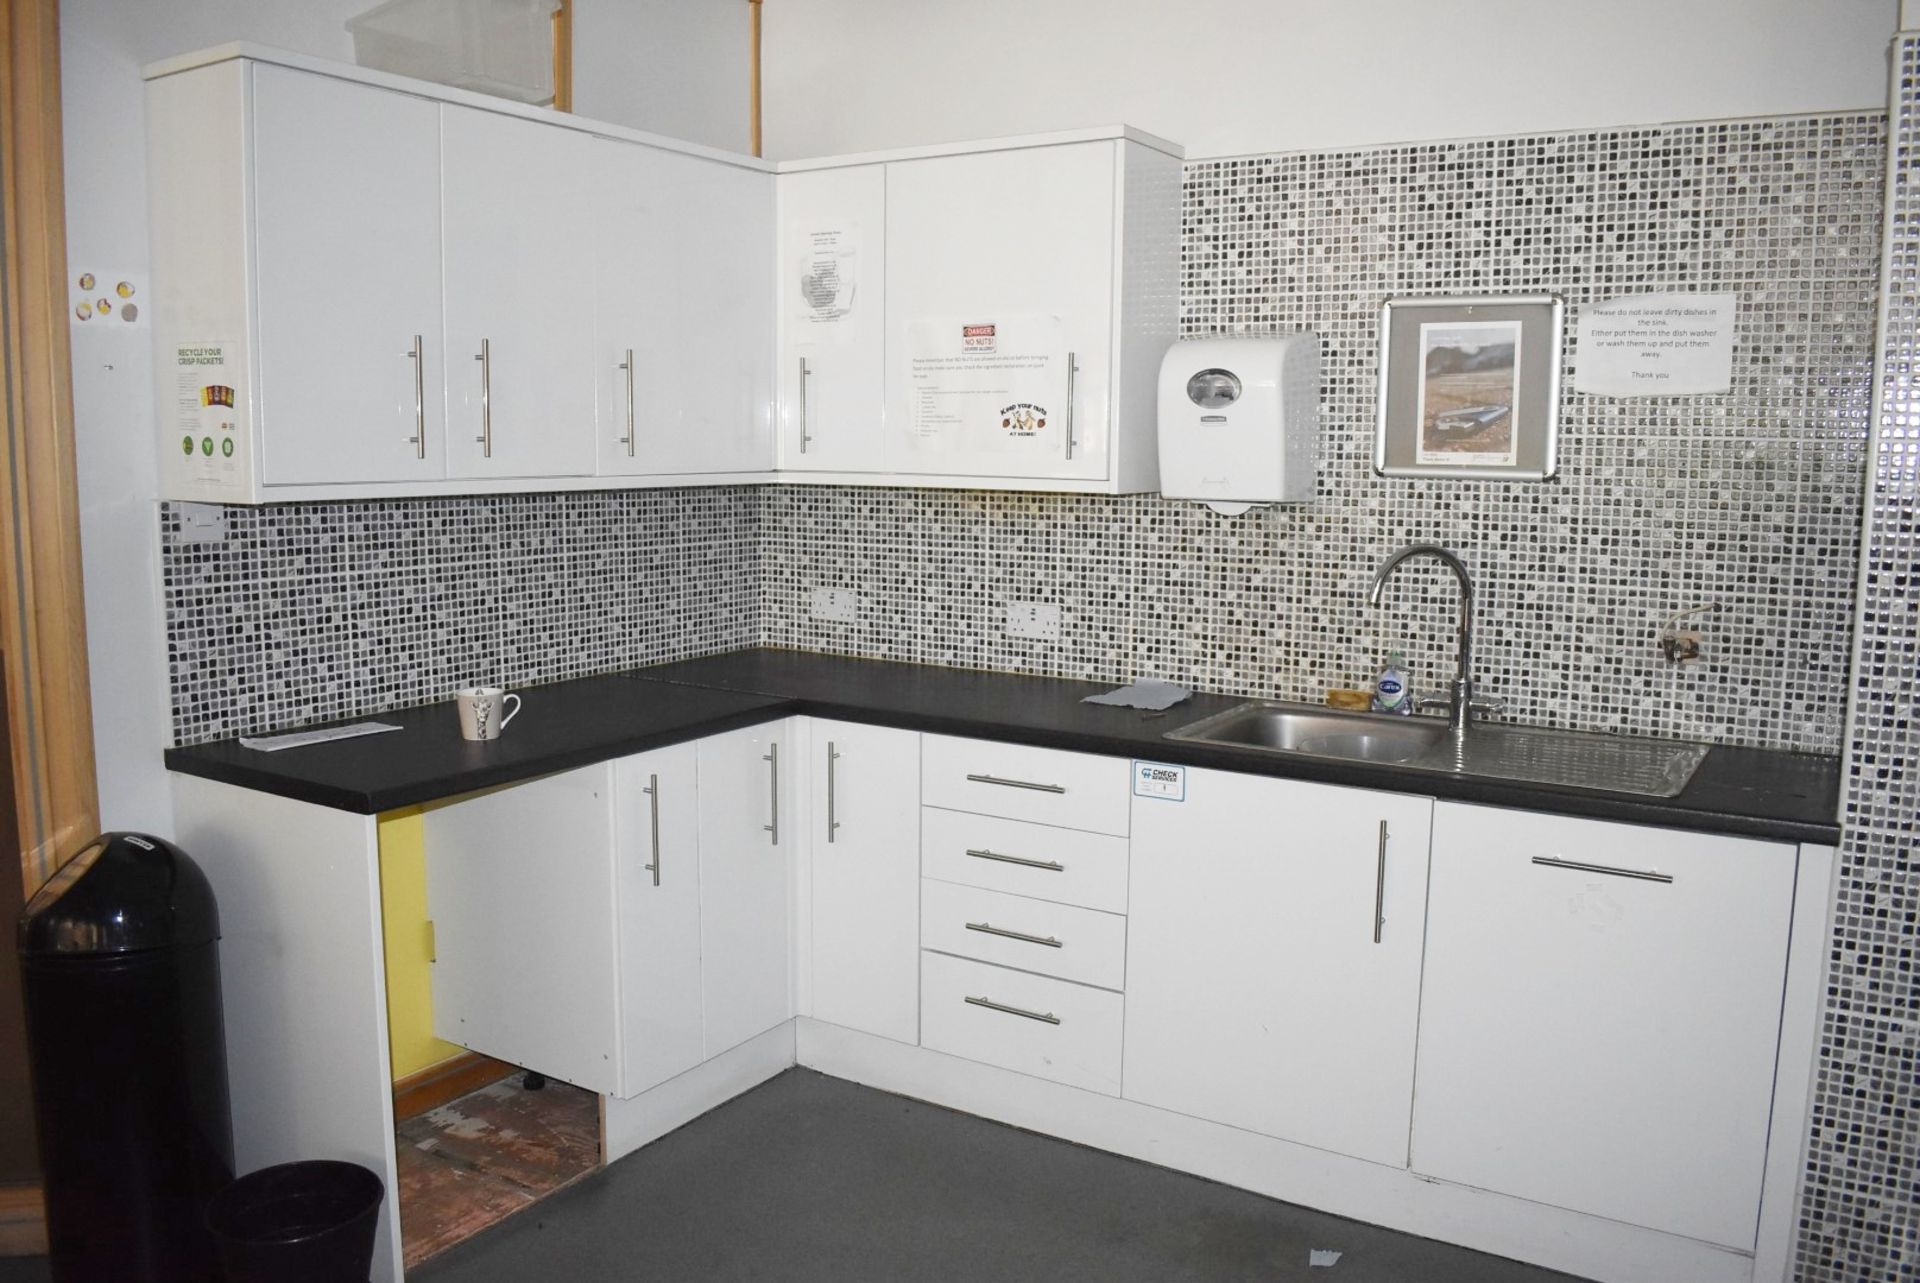 1 x White Gloss Fitted Kitchen With Stainless Steel Sink and Mixer Tap, Two Integrated Fridges and